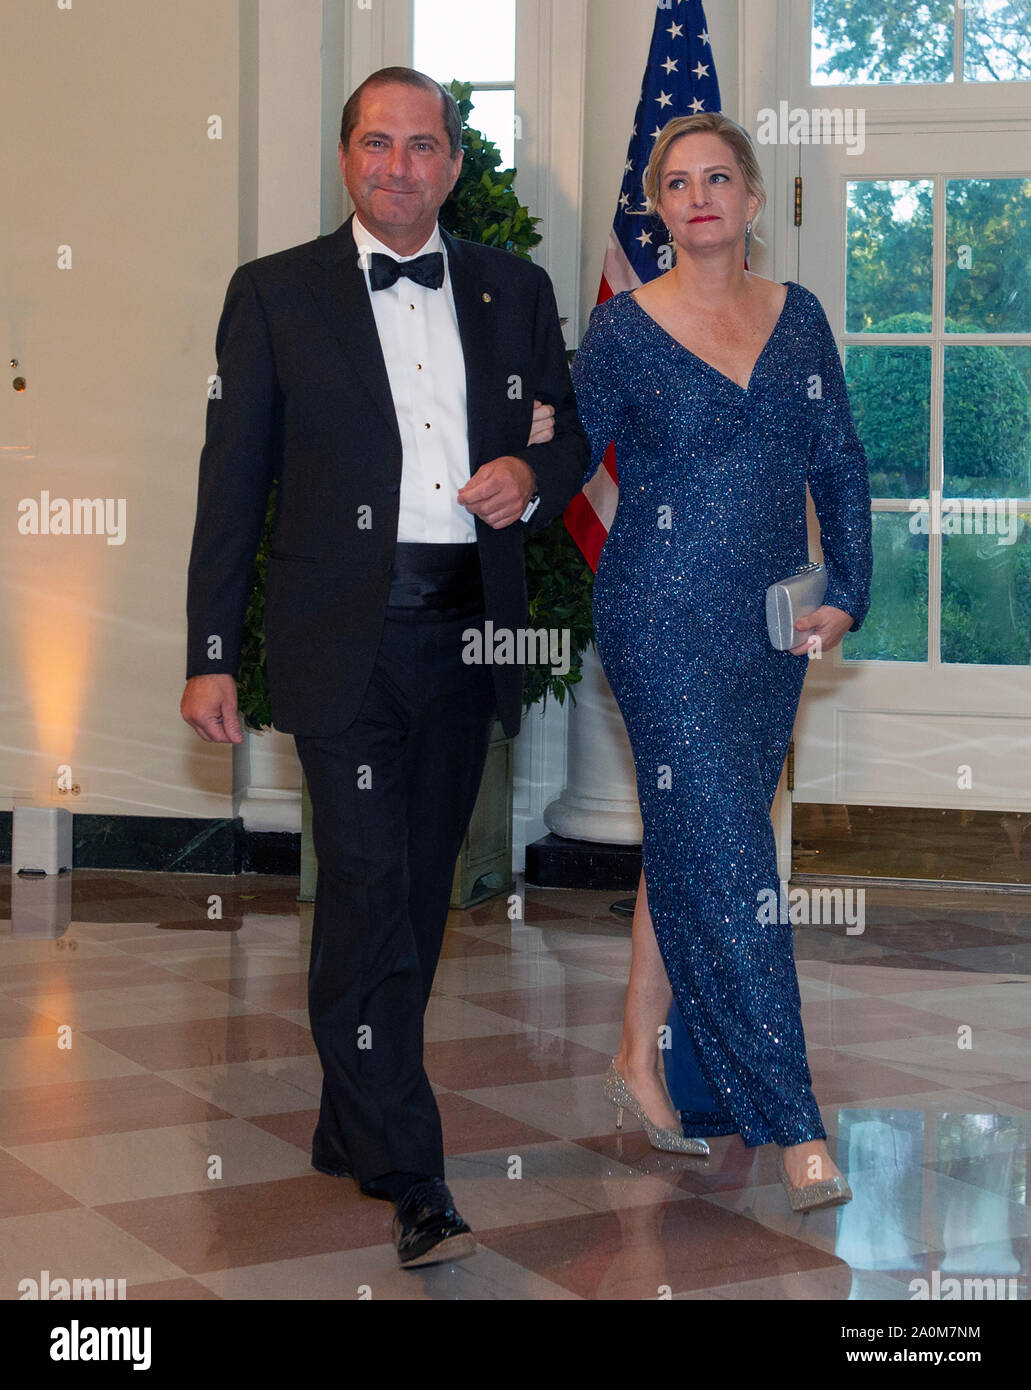 United States Secretary of Health and Human Services (HHS) Alex Azar and  Jennifer Azar arrive for the State Dinner hosted by United States President  Donald J. Trump and First lady Melania Trump